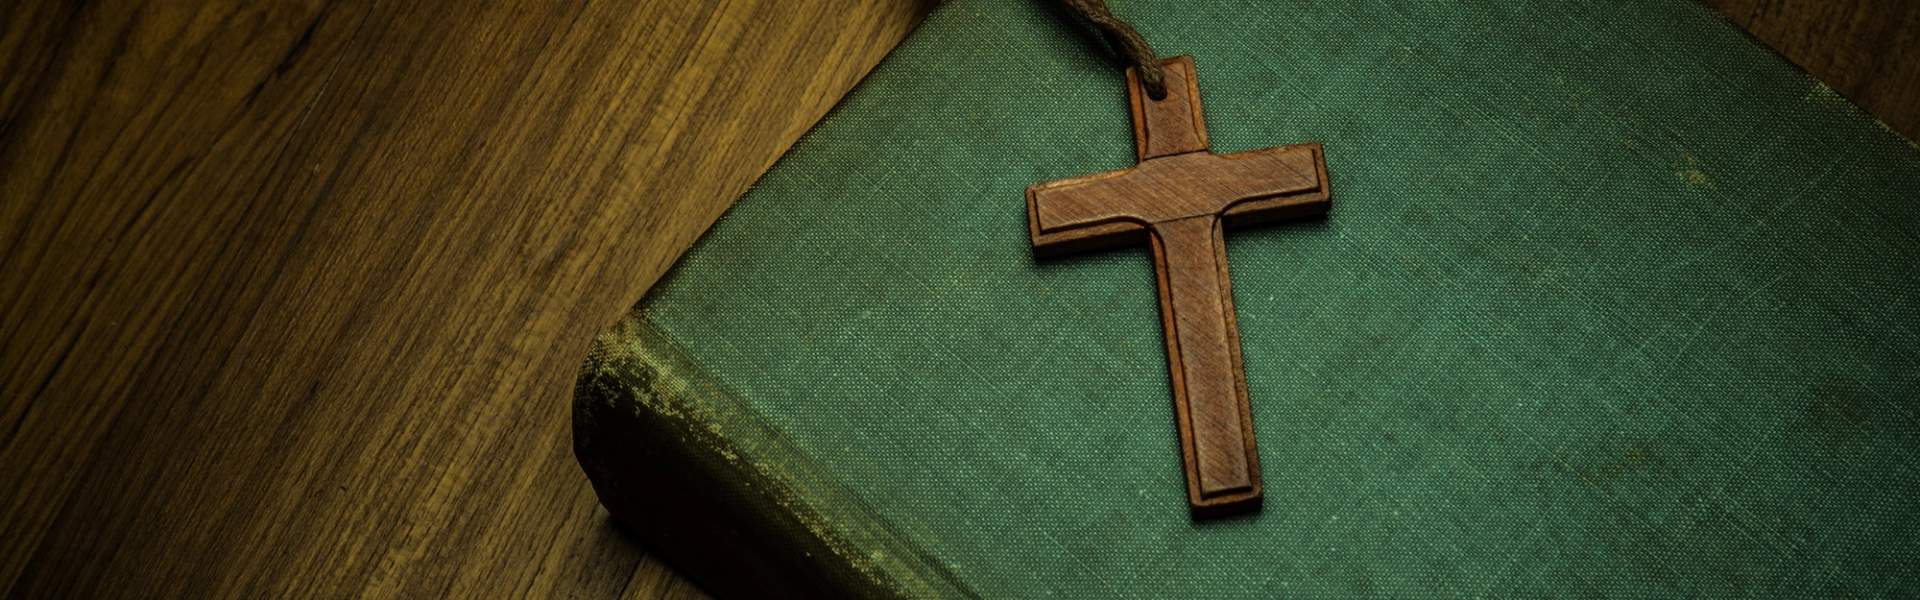 Bible and a Cross on a table